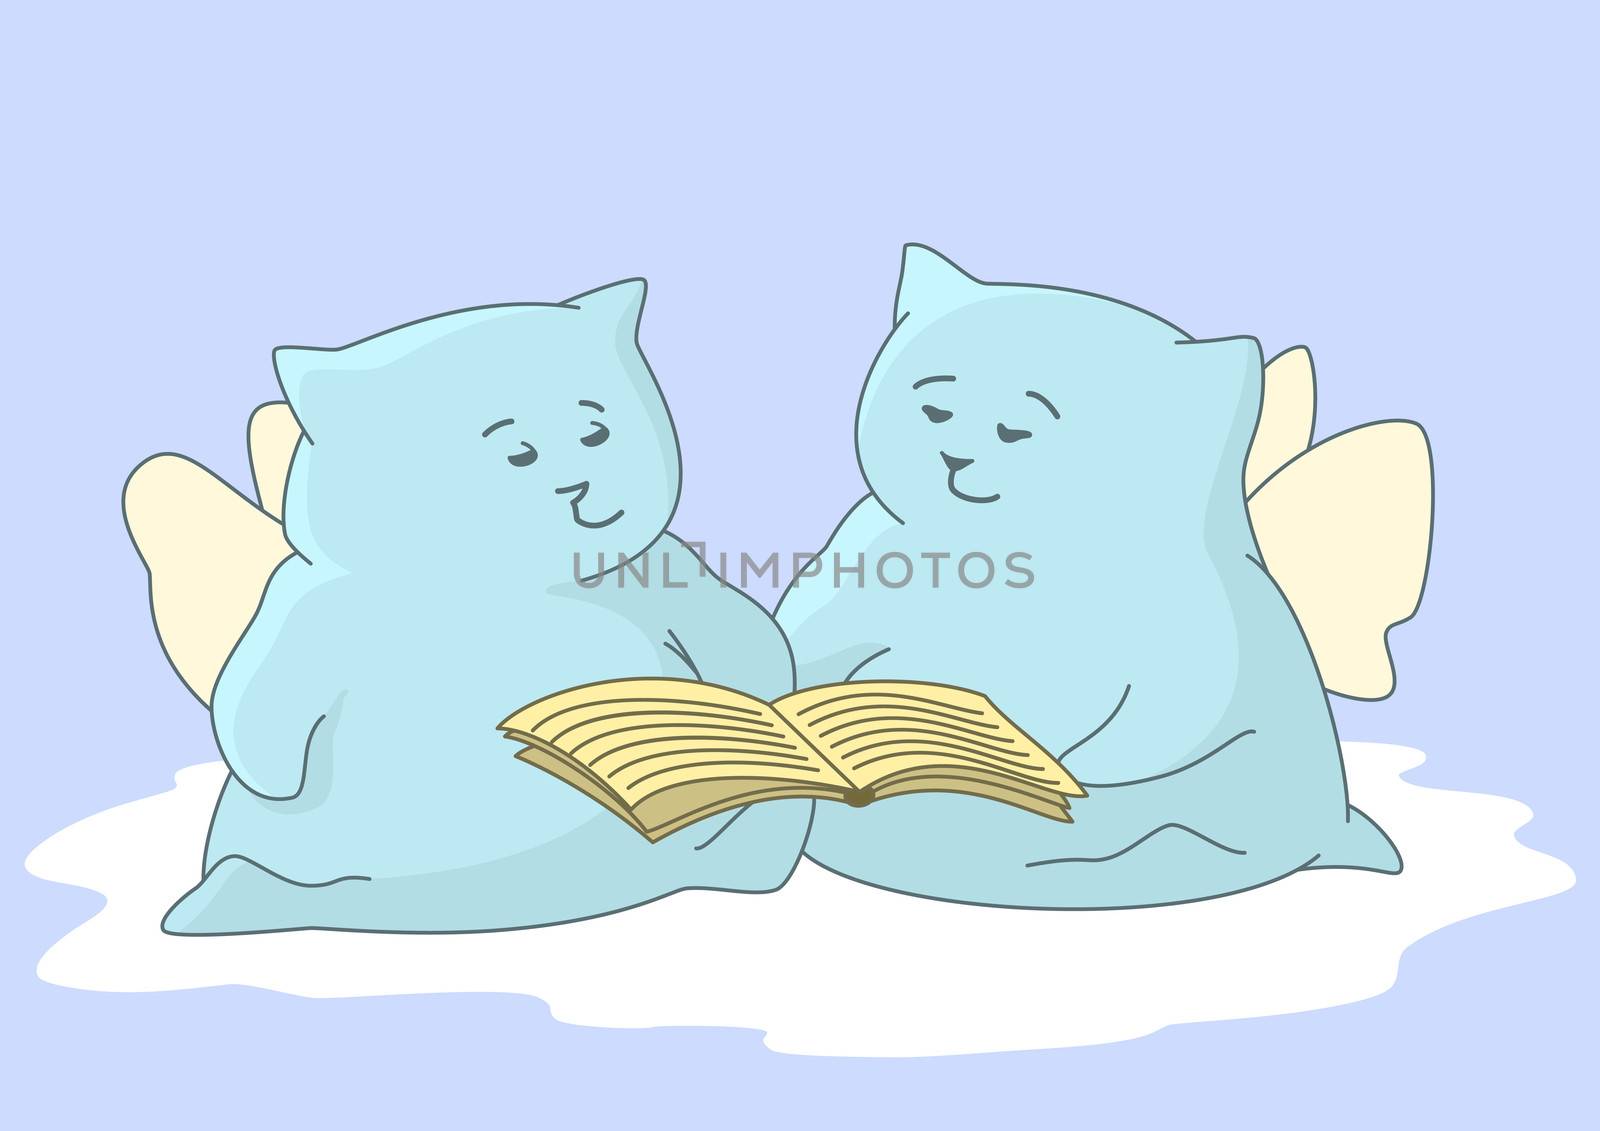 Angels-pillows children siting on a white cloudlet against the sky and reading the book